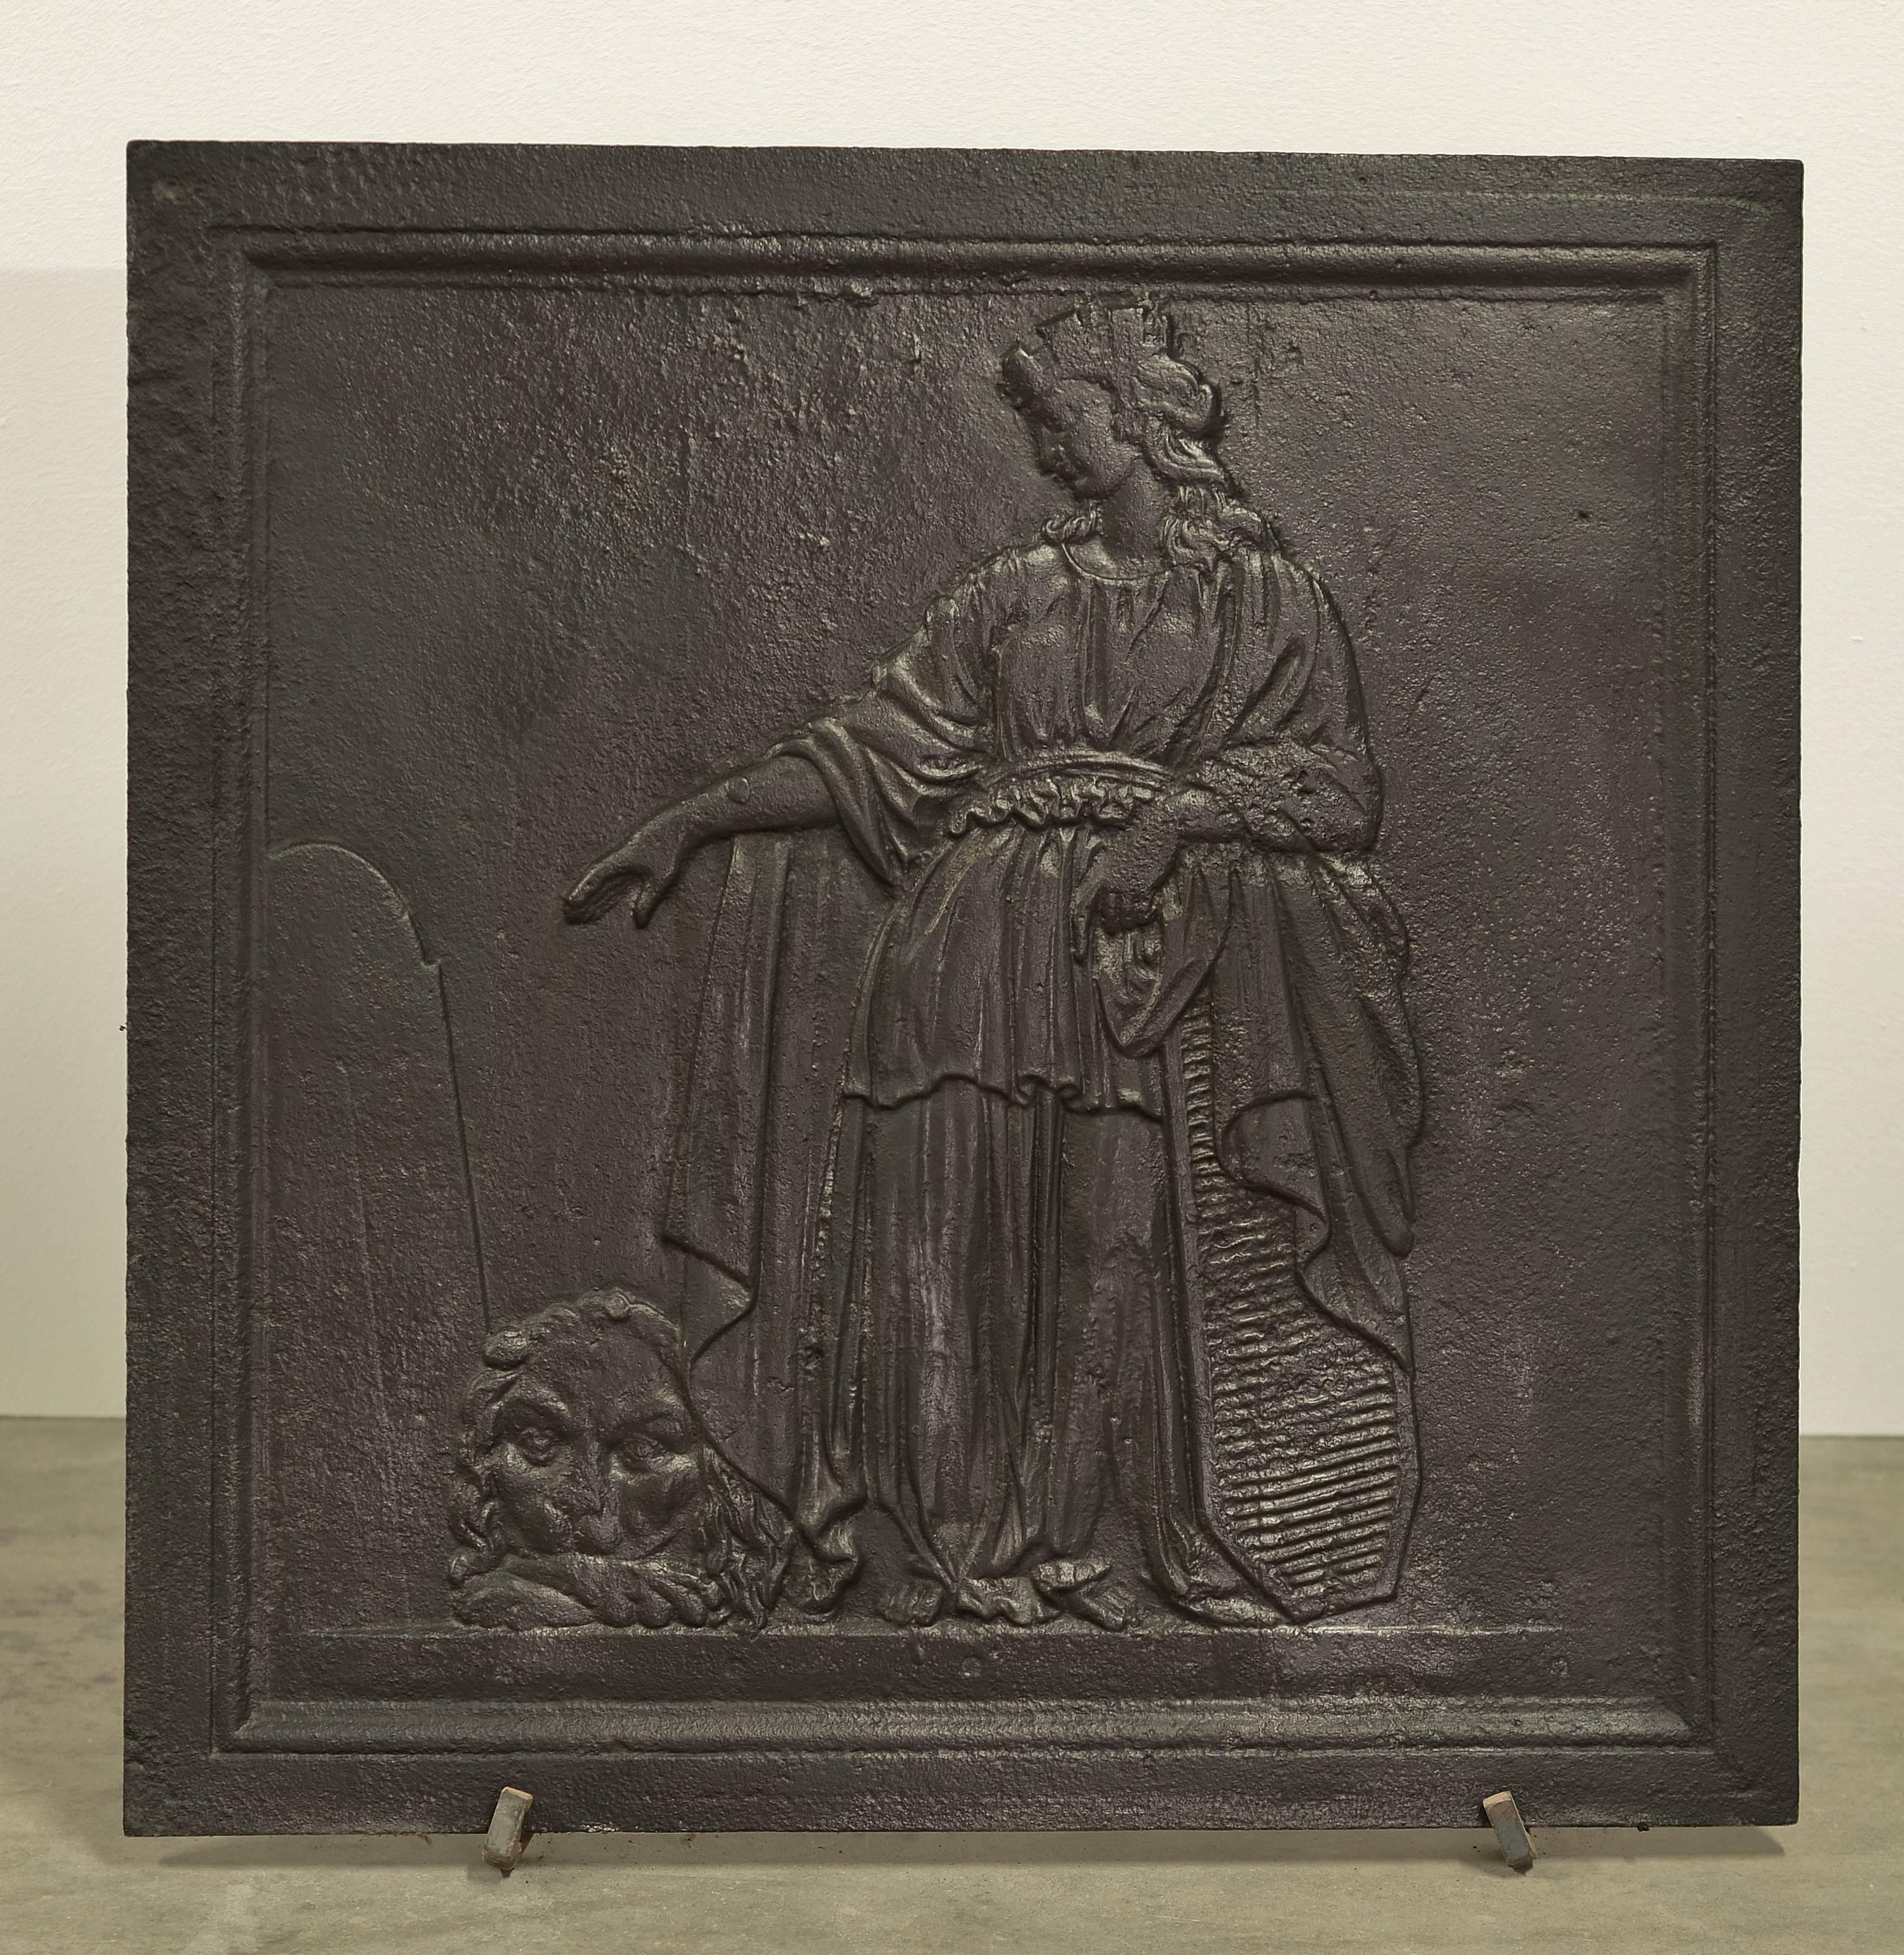 Sharp, square and decorative cast iron antique fireback.
Mourning Queen next to a grave with a lion at her feet in between.

Excellent condition, usable dimension.
Can be used in a fire or as eye-catching backsplash.

Can be supplied with